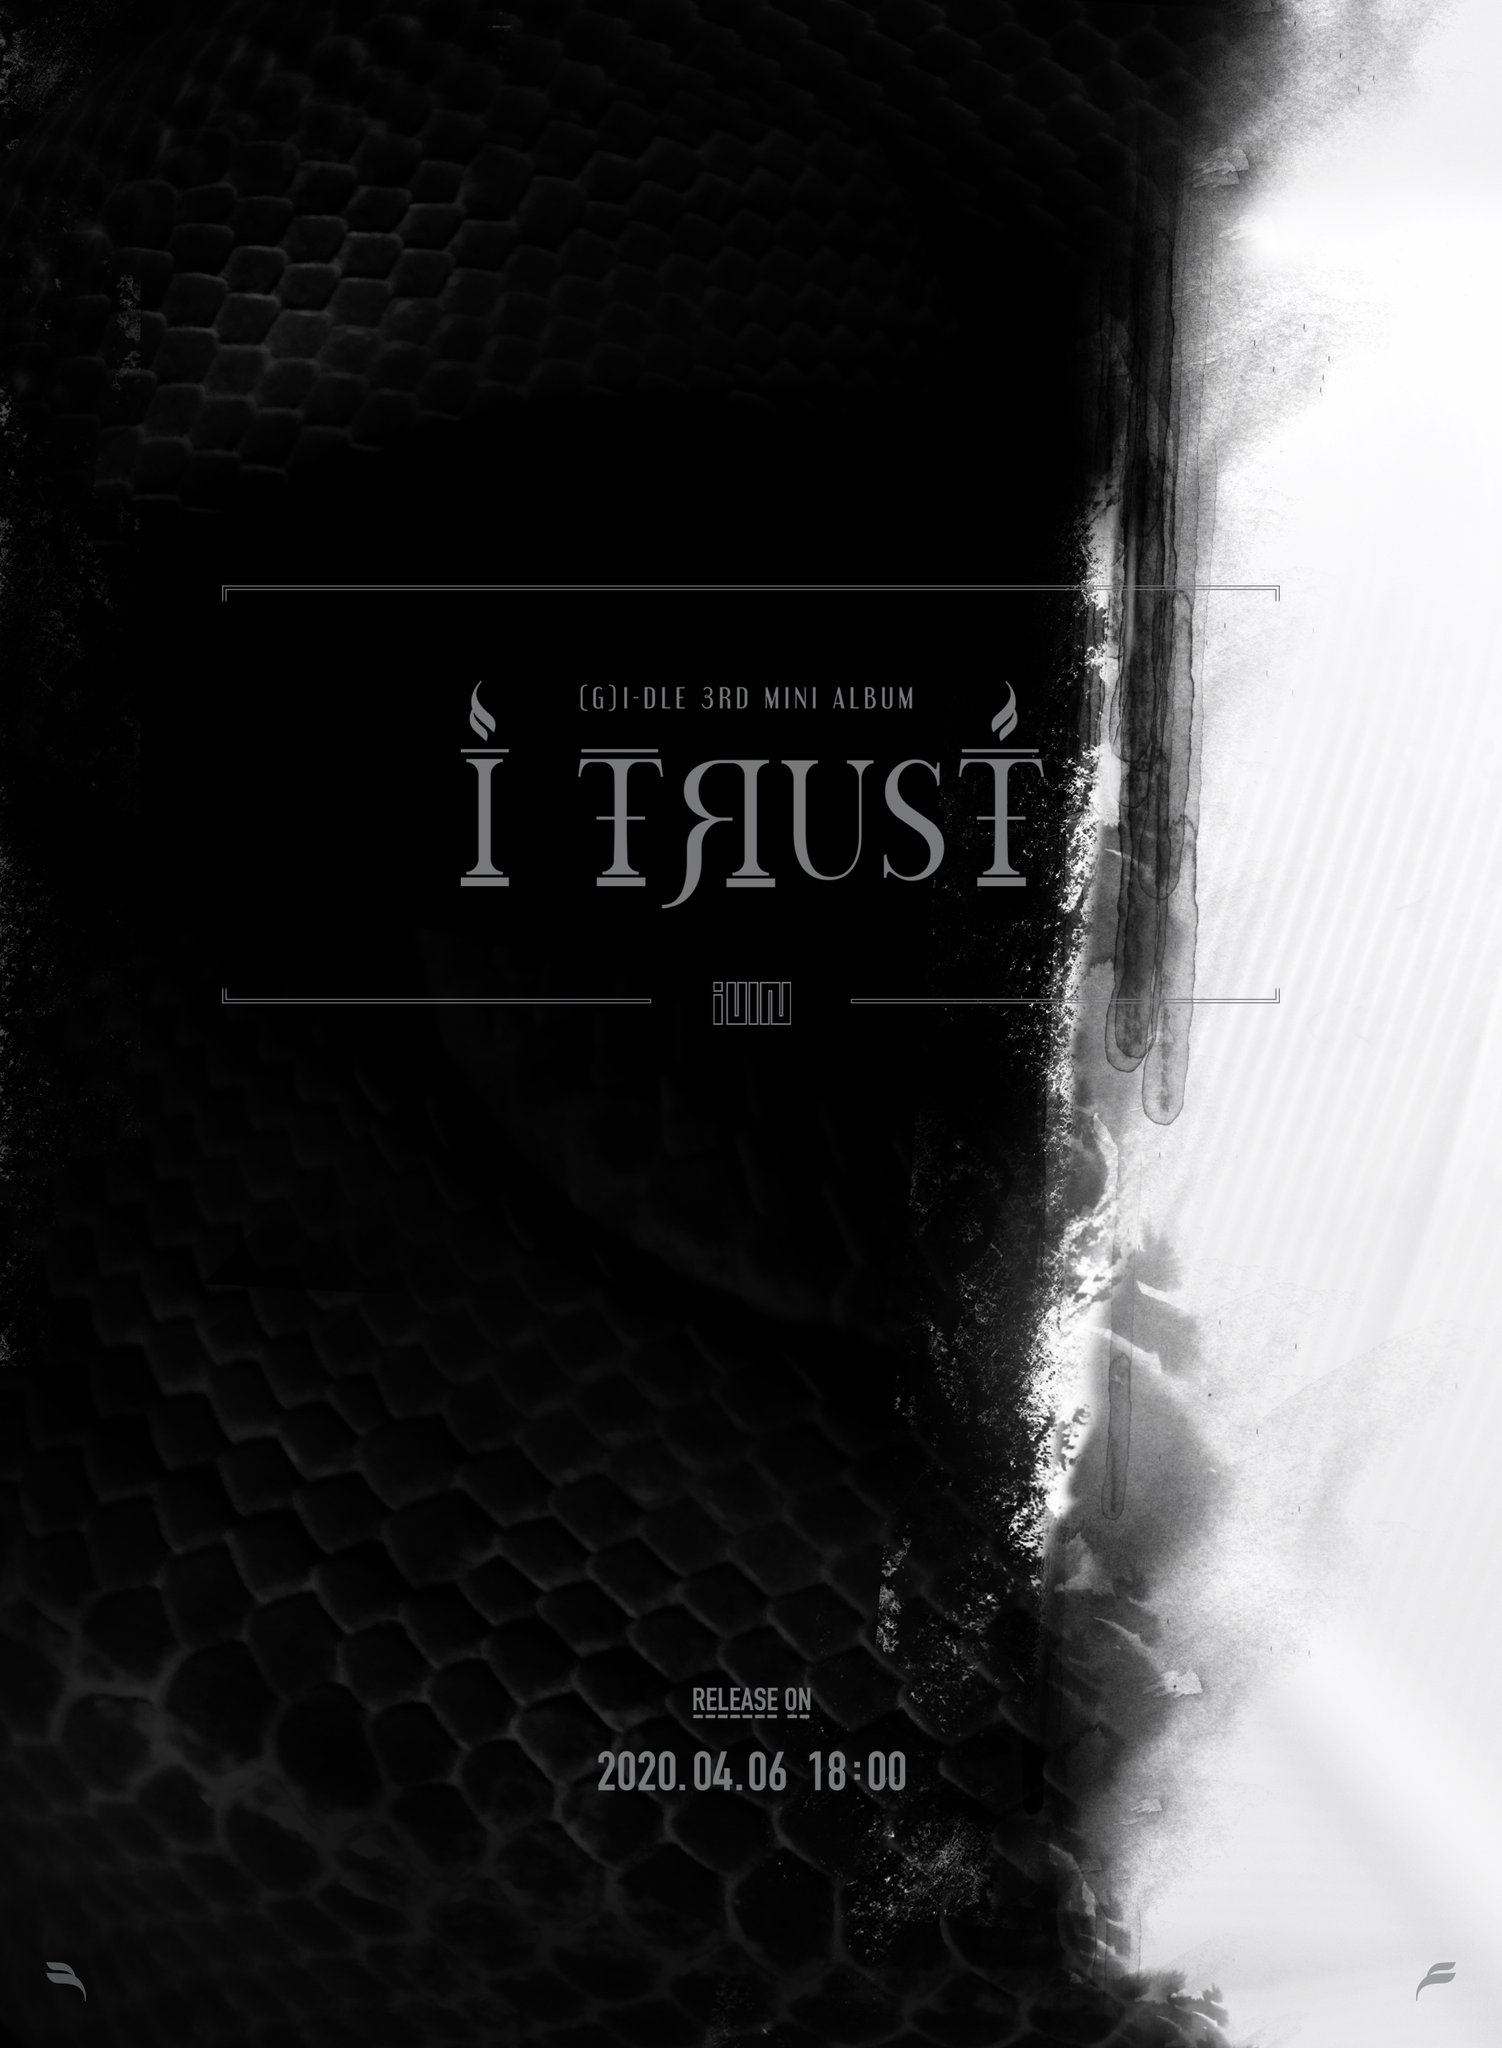 gi-dle-reveals-hint-for-previously-postponed-album-i-trust-through-photo-teaser-1